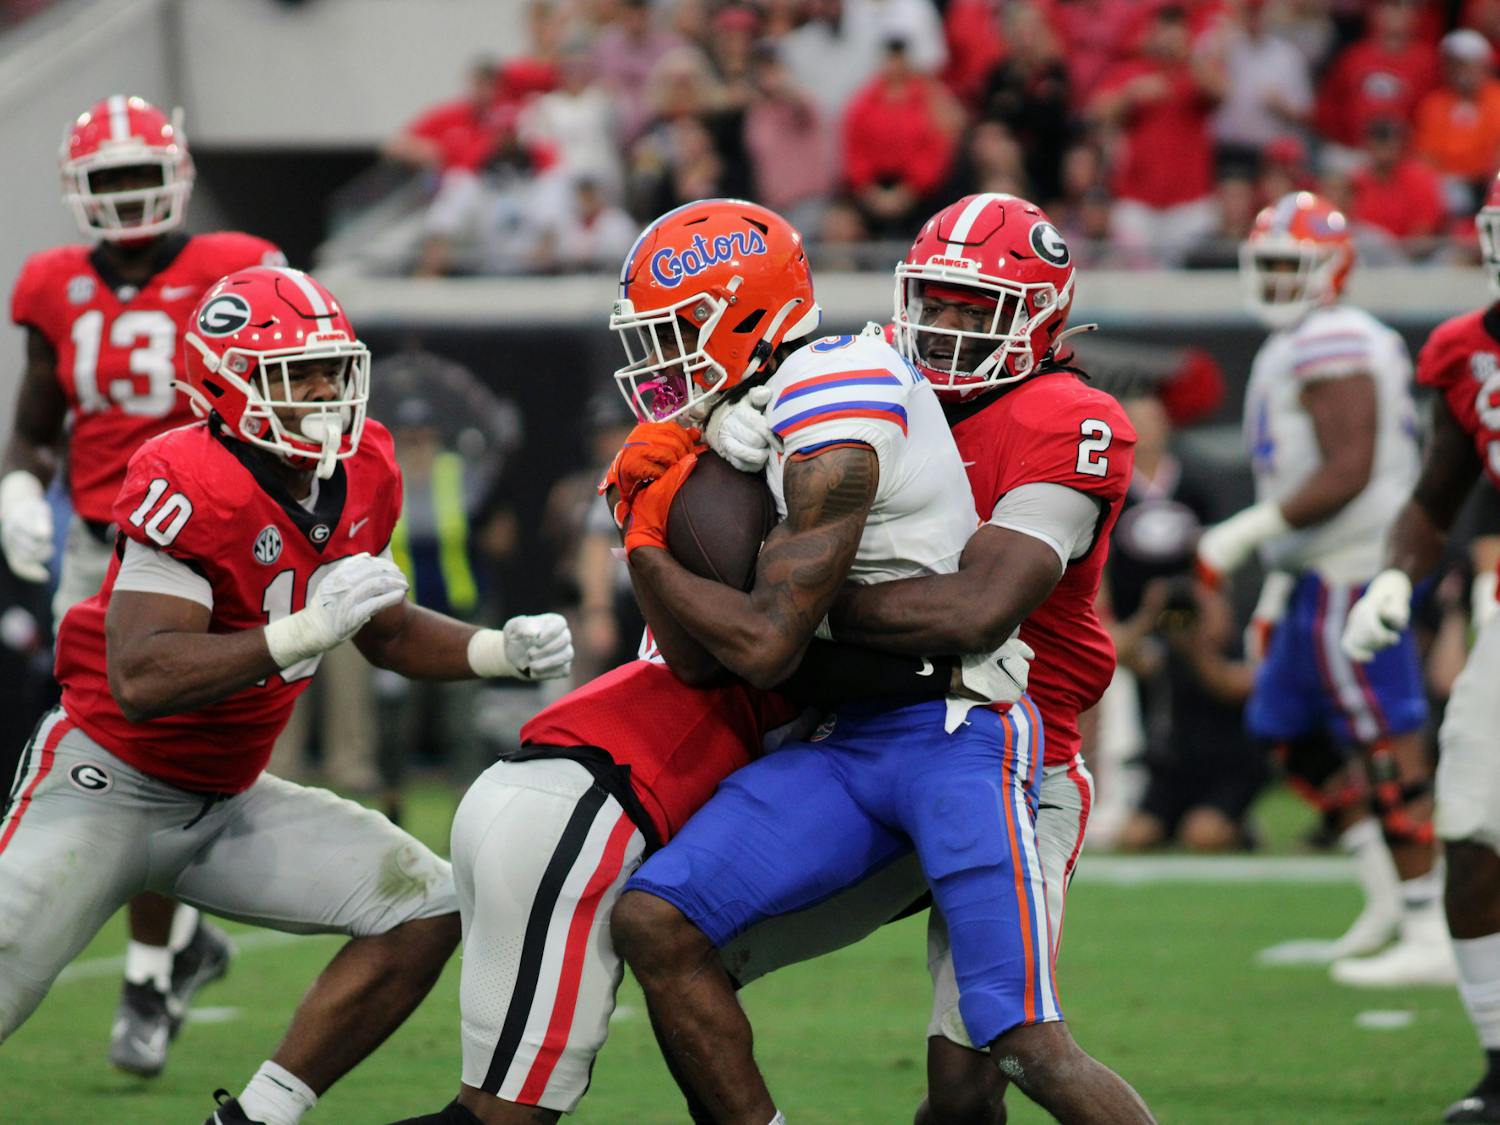 UGA, the No. 1 team in the country and reigning national champion, proved to be too much for Florida Saturday en route to a 42-20 win. Georgia’s best players like Bowers and junior defensive lineman Jalen Carter dominated as head coach Kirby Smart’s team looked the part of the country’s top team.